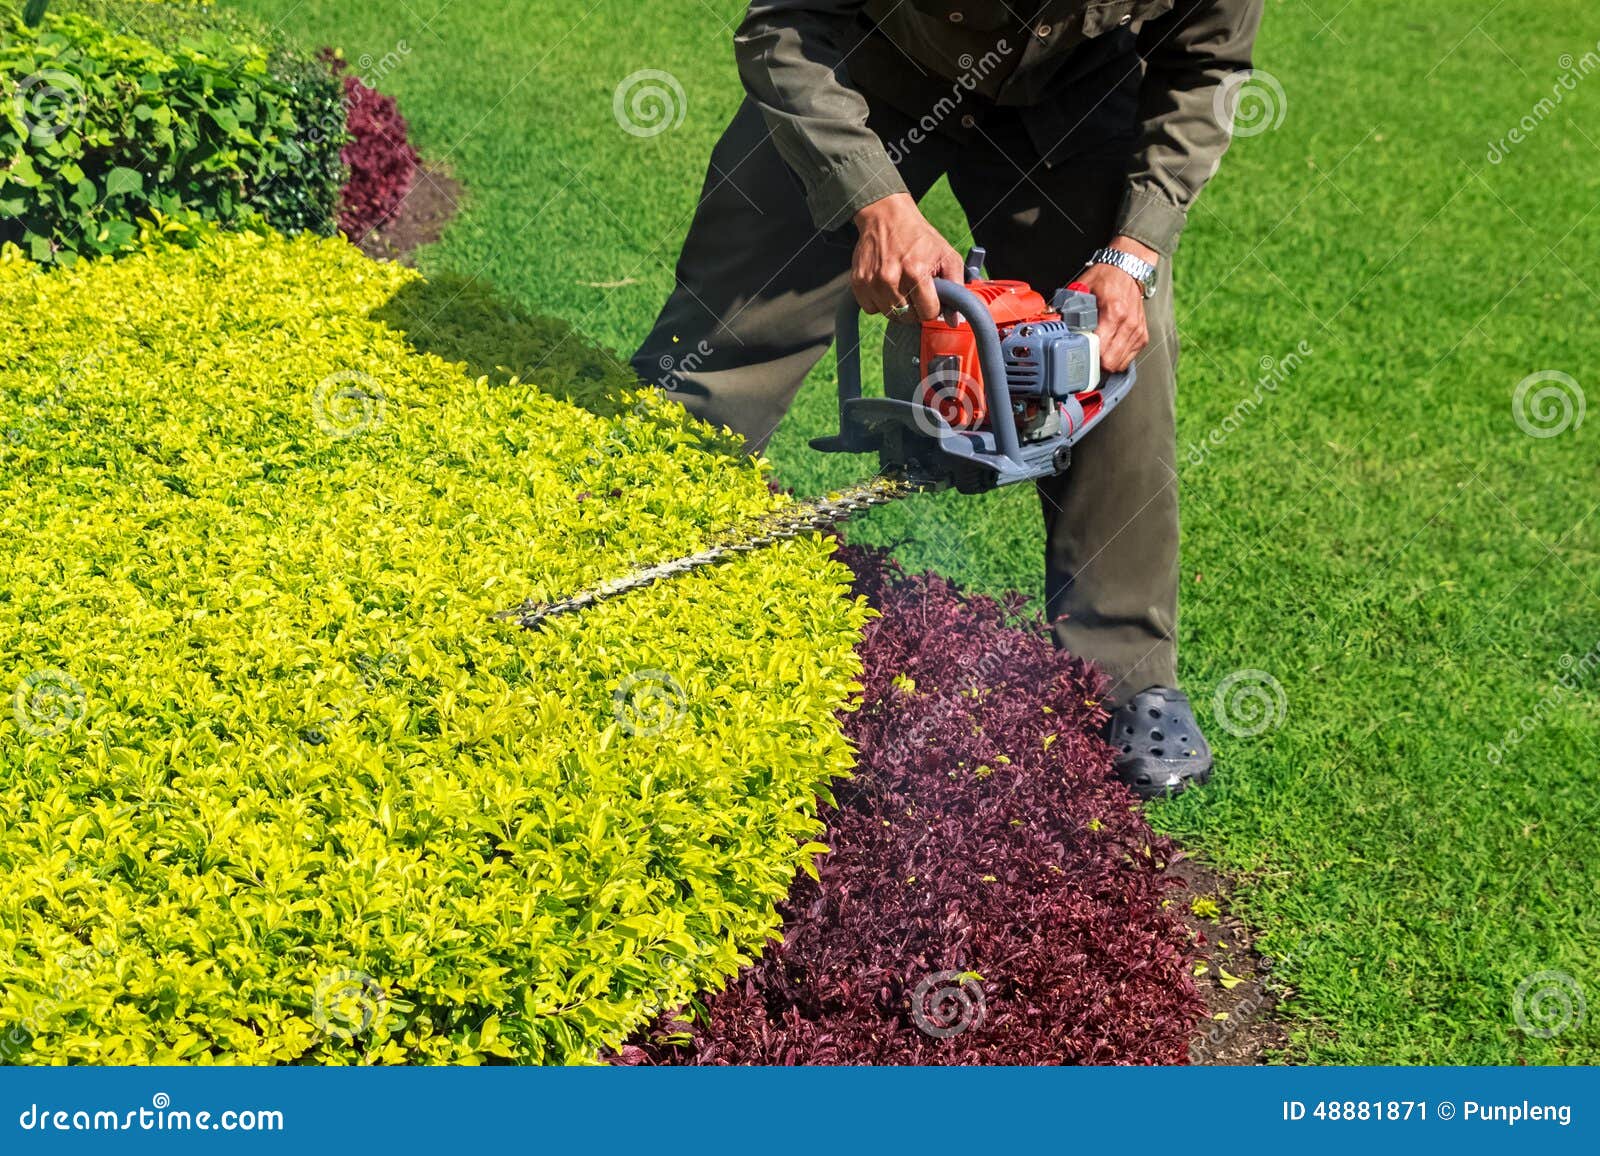 gardener trimming shrub with hedge trimmer